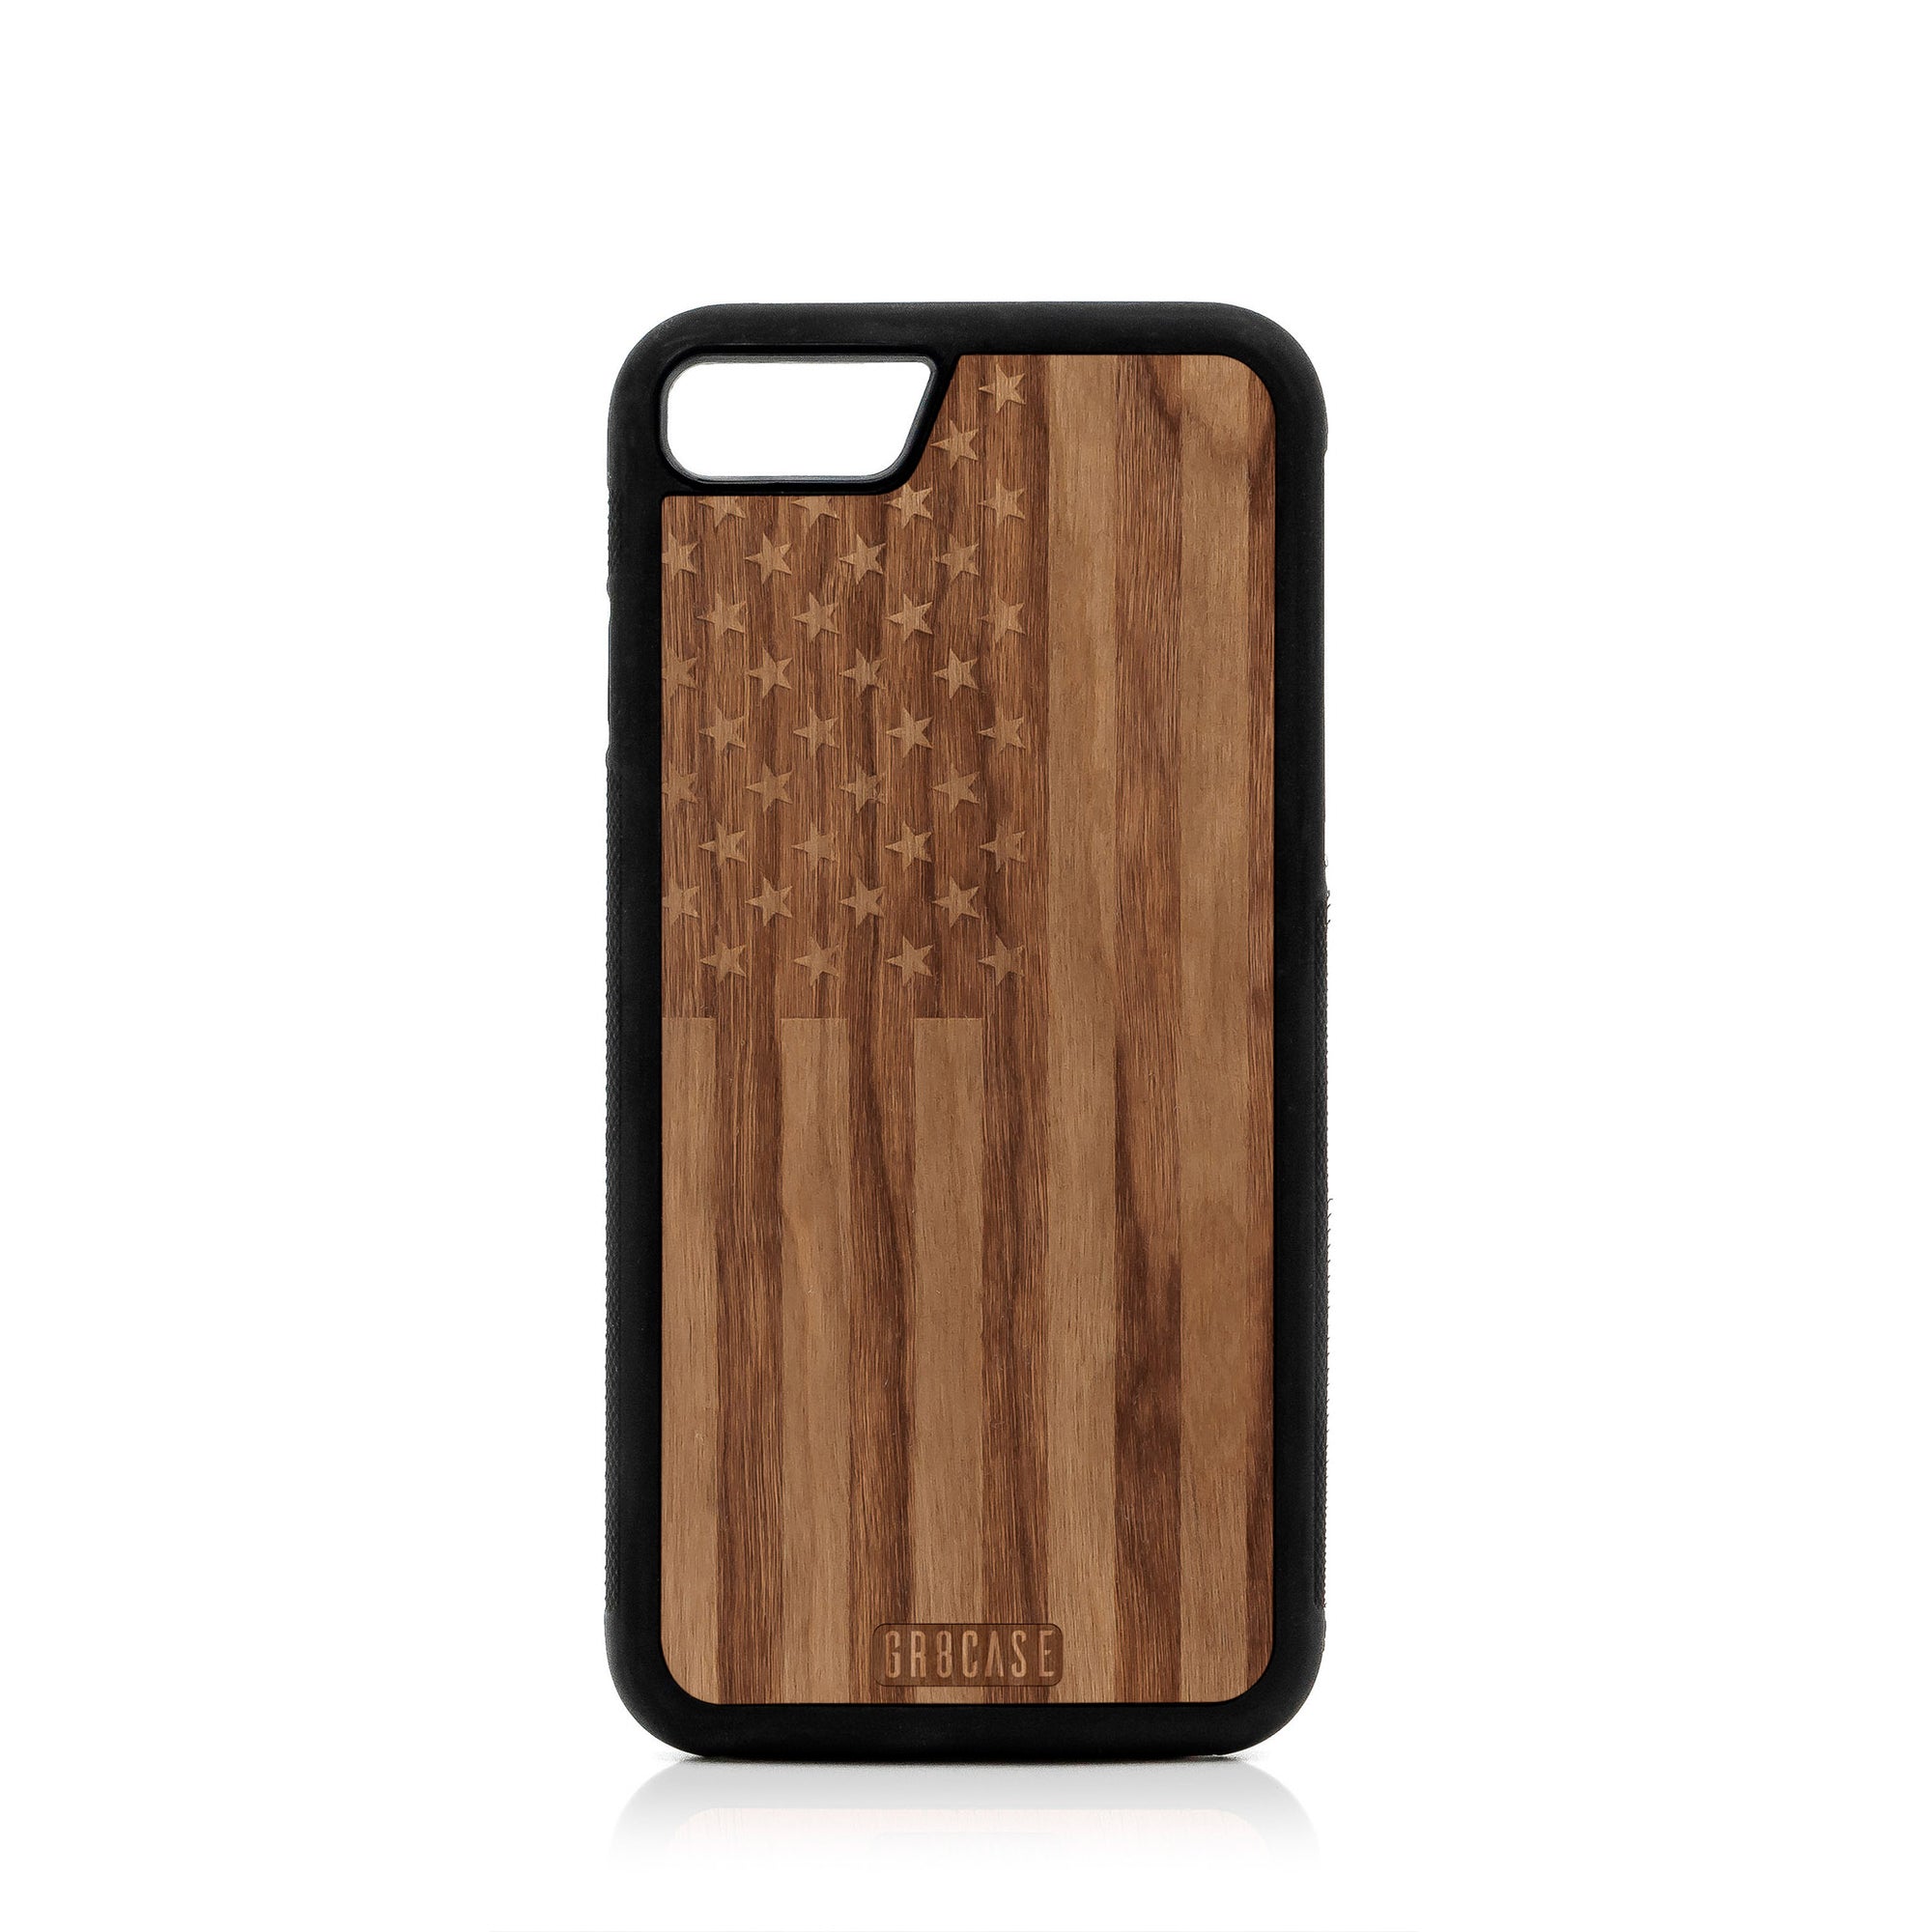 USA Flag Design Wood Case For iPhone 7/8